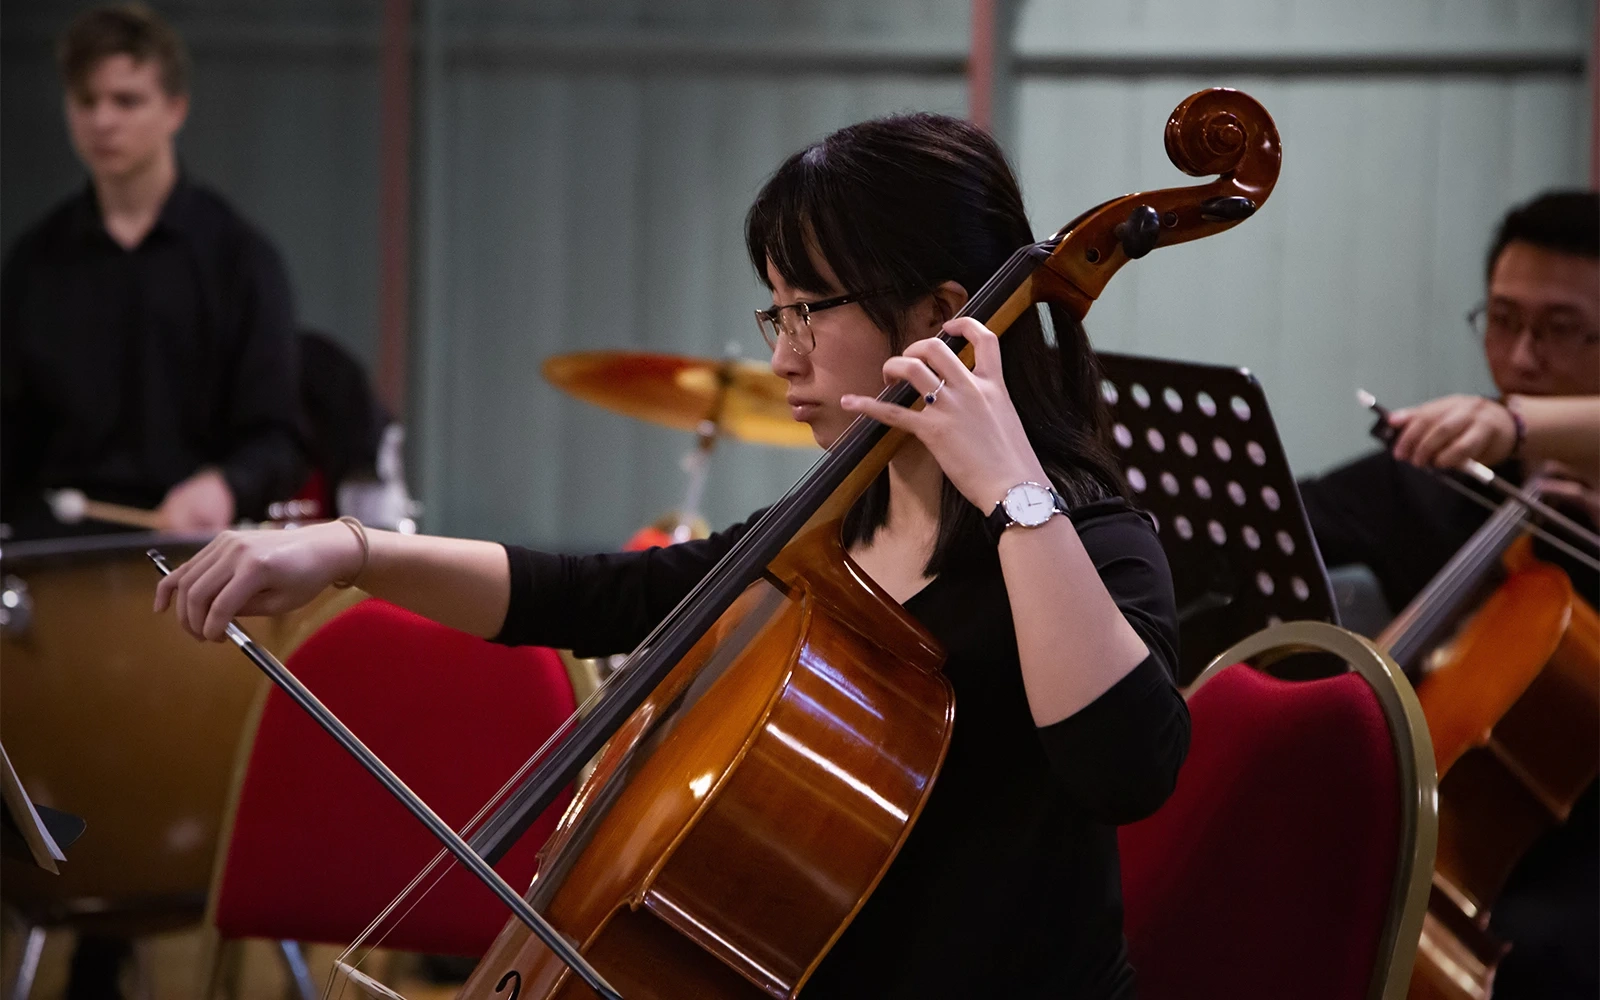 A young woman playing the cello during an orchestral concert